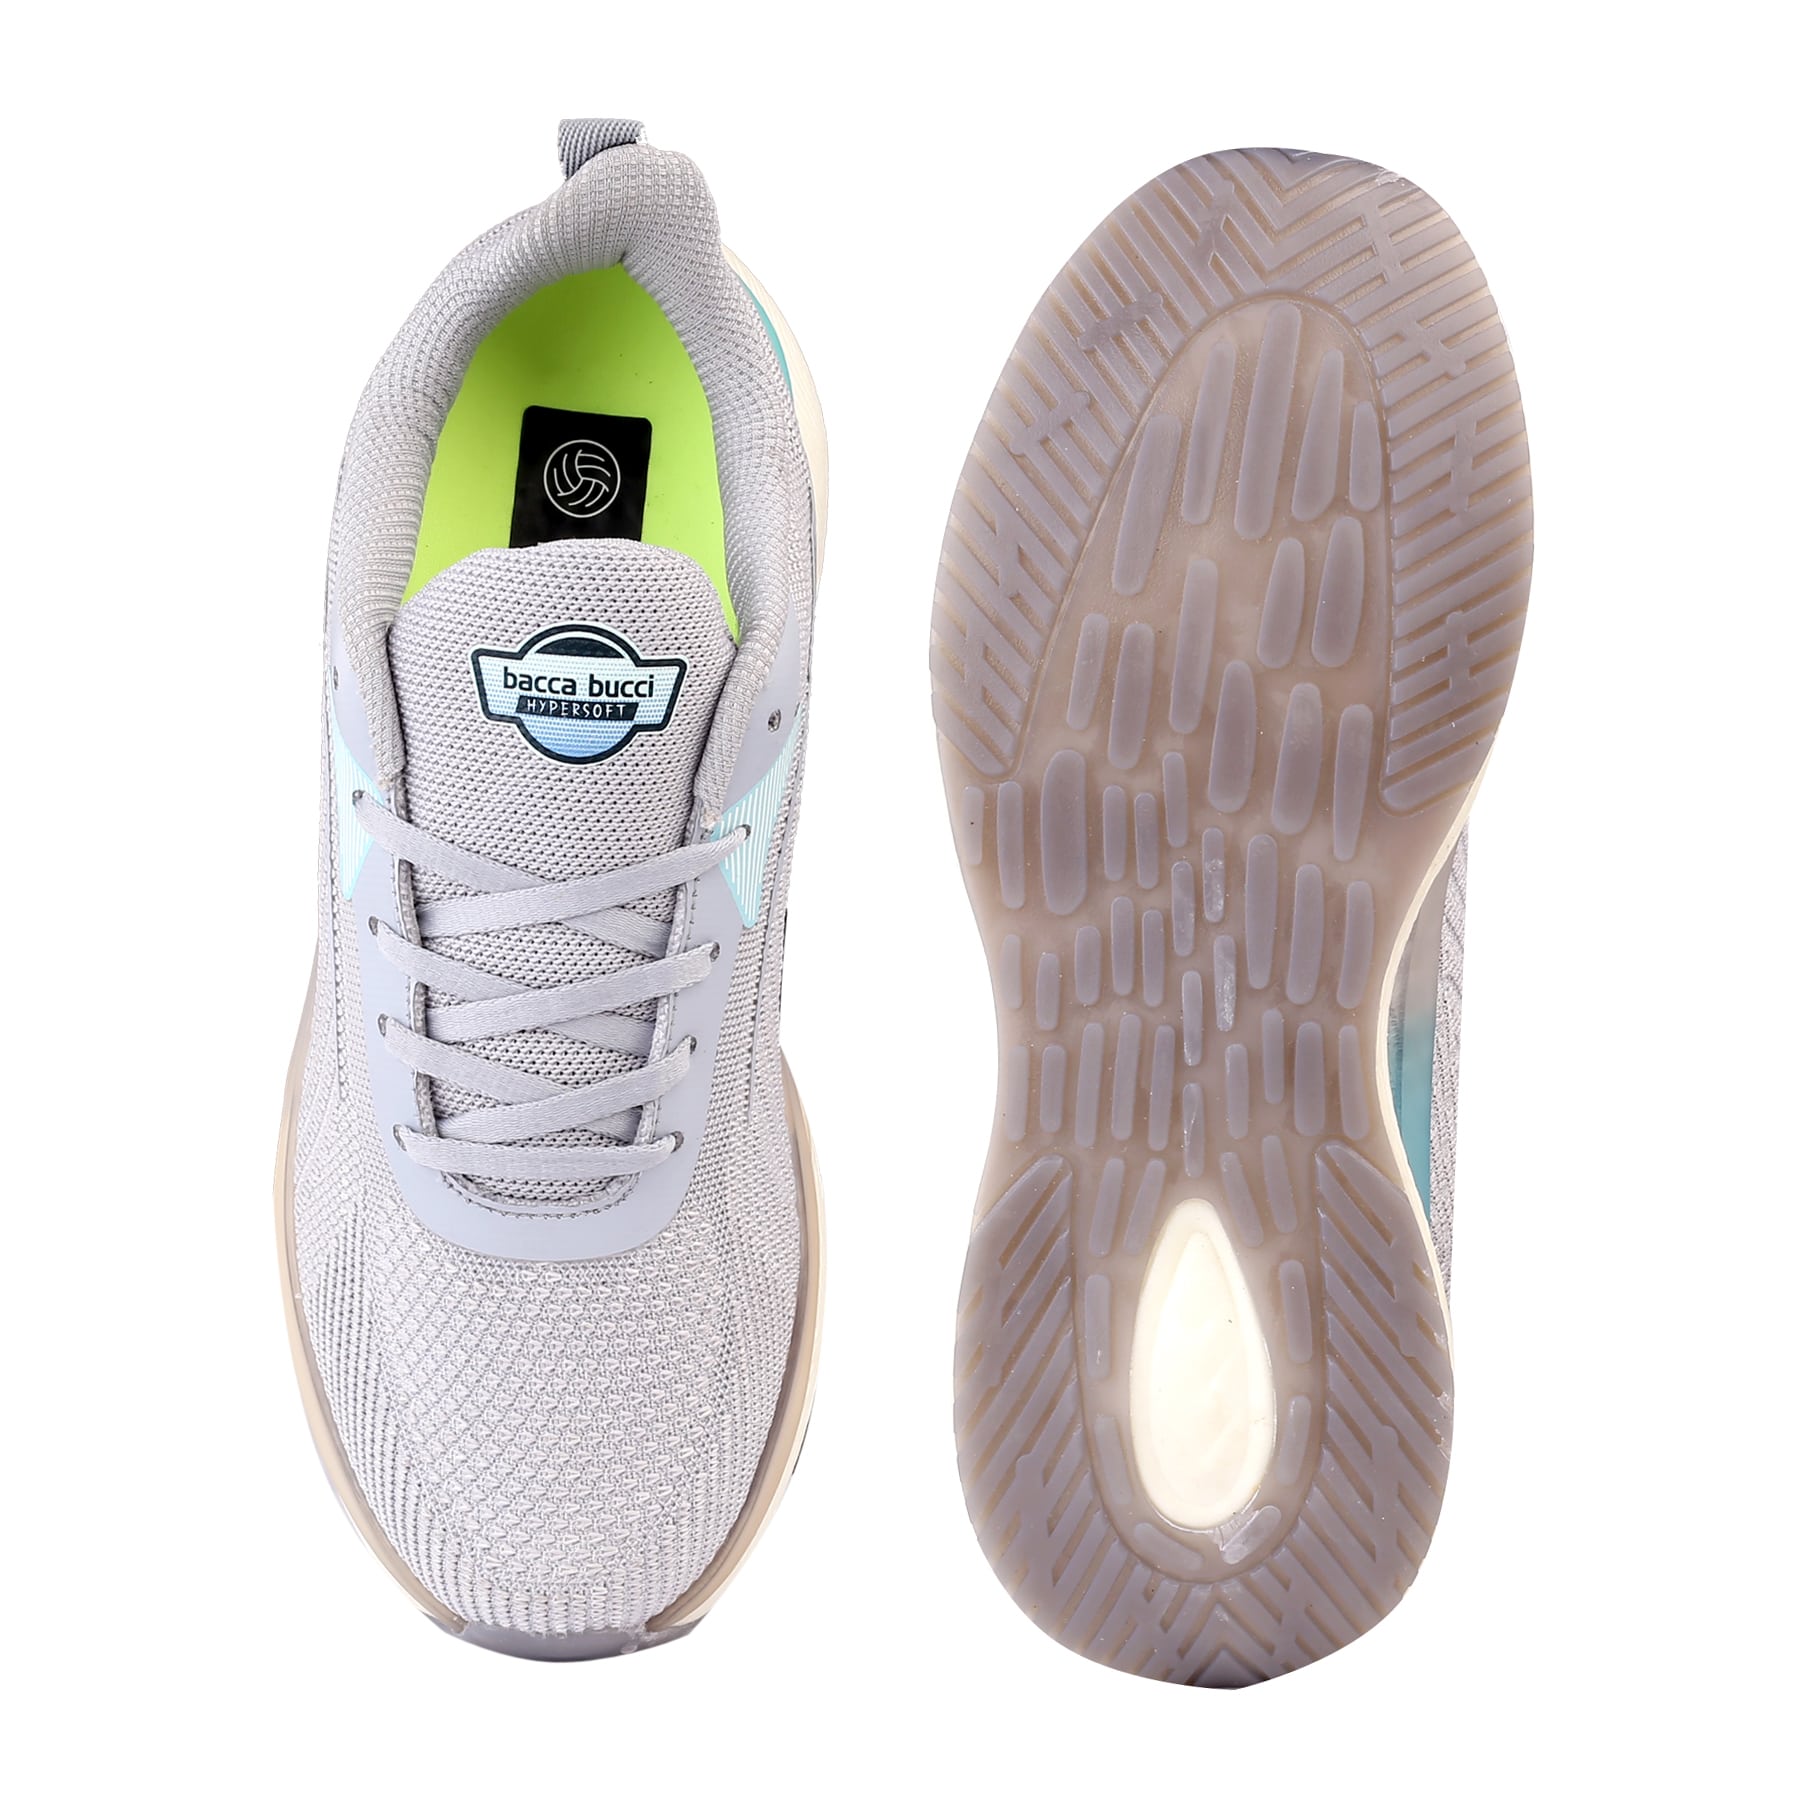 Bacca Bucci HYPERSOFT SERIES with Ultra-Rebounce Outsole & Iconic Breathable Engineered Knit Upper Running Shoes